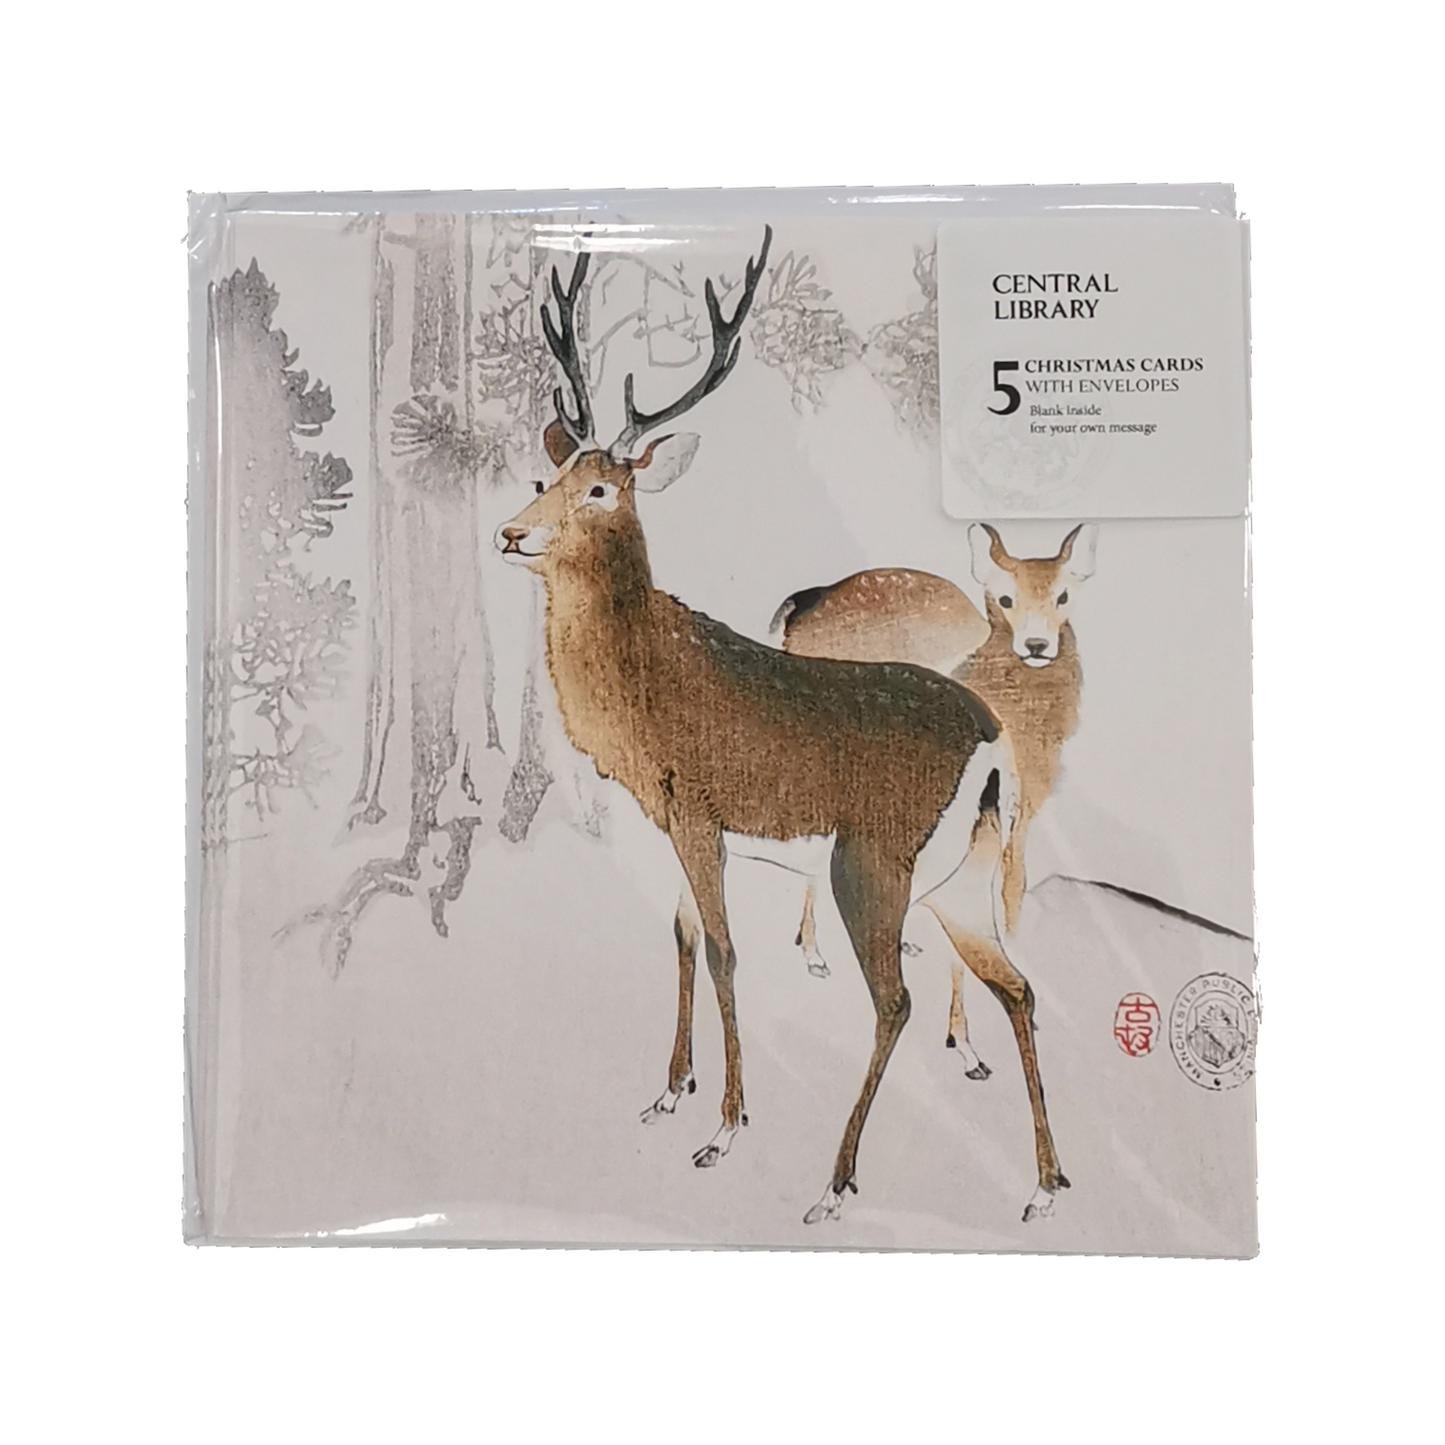 Pack of 5 Christmas cards featuring 2 Deer. Image taken from Early Modern Japanese Colour Prints